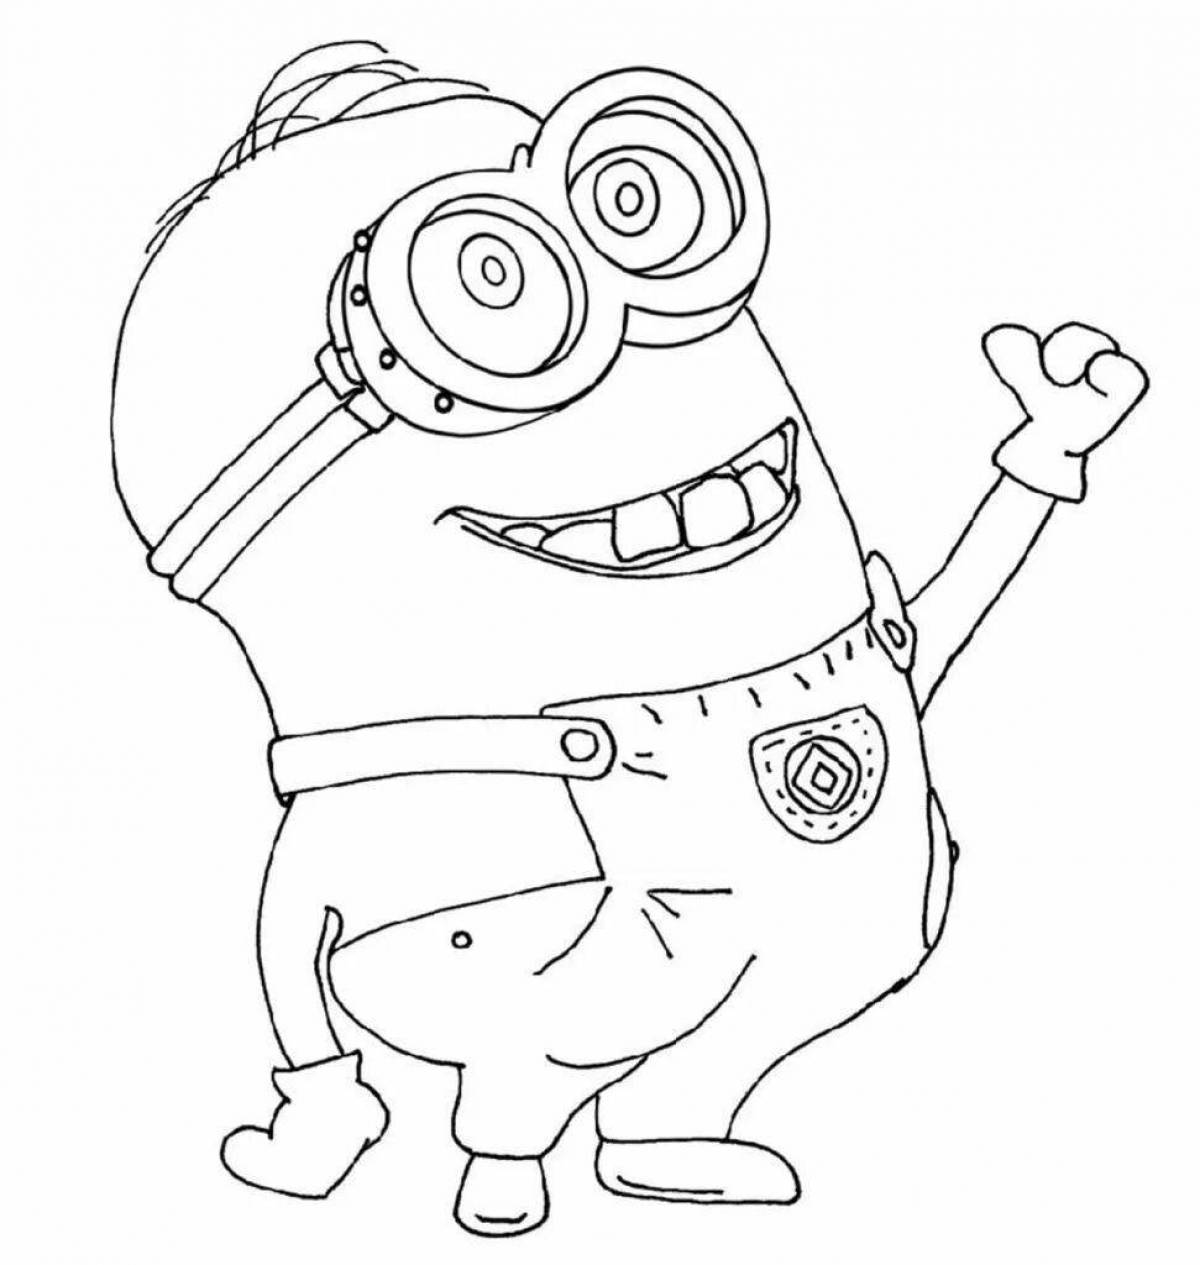 Color-joy cool coloring page for kids